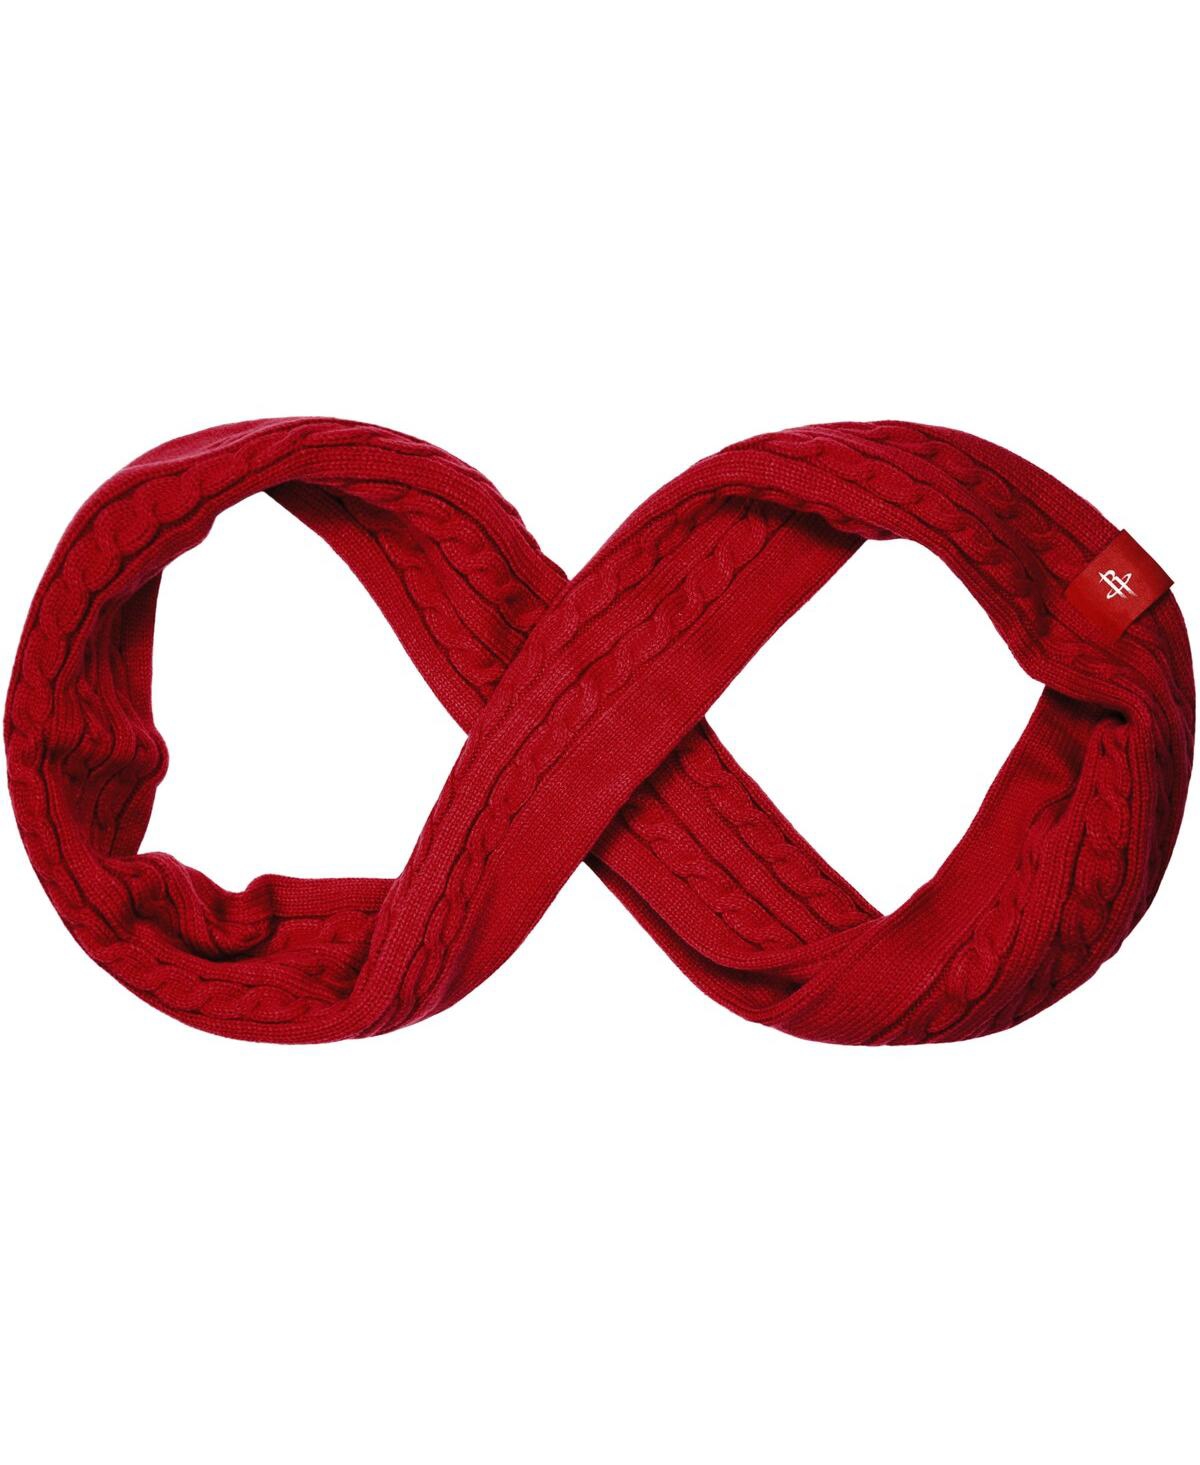 Women's Red Houston Rockets Cable Knit Infinity Scarf - Red